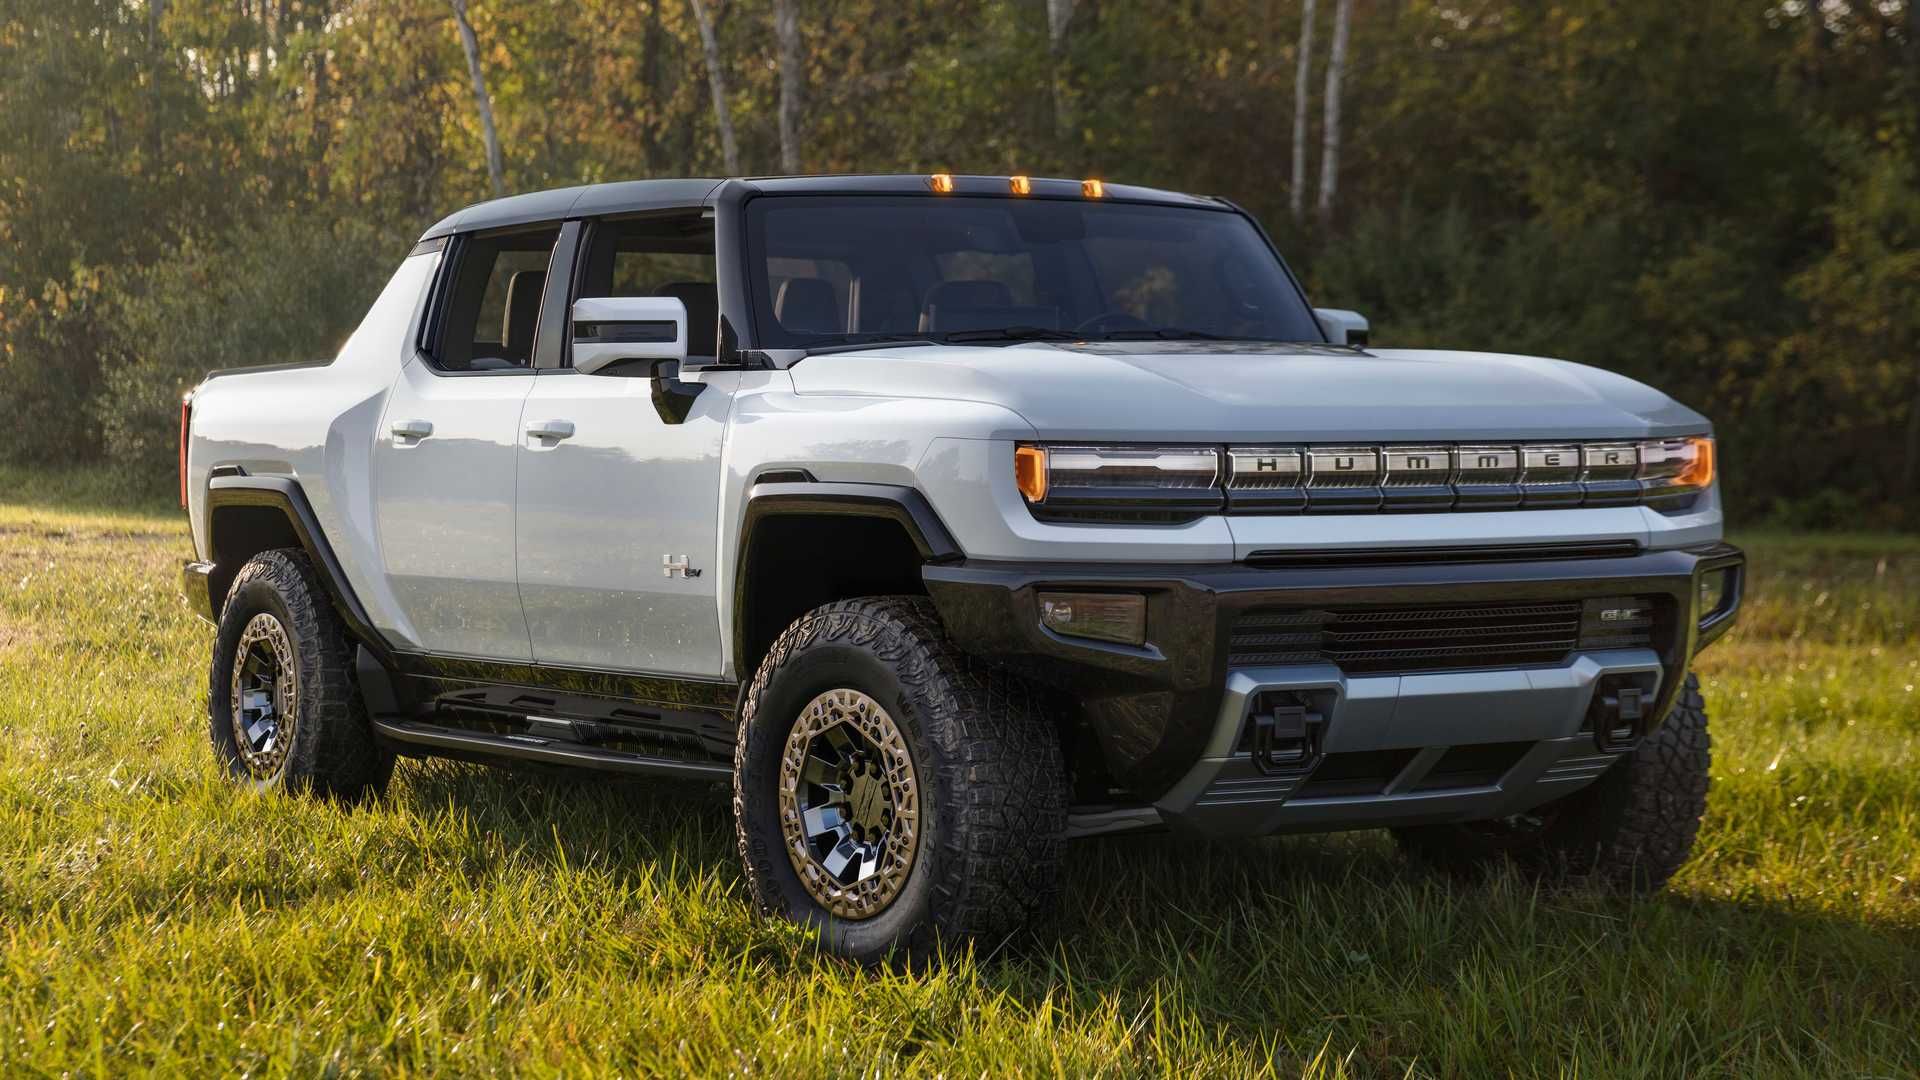 the new all-electric GMC Hummer EV